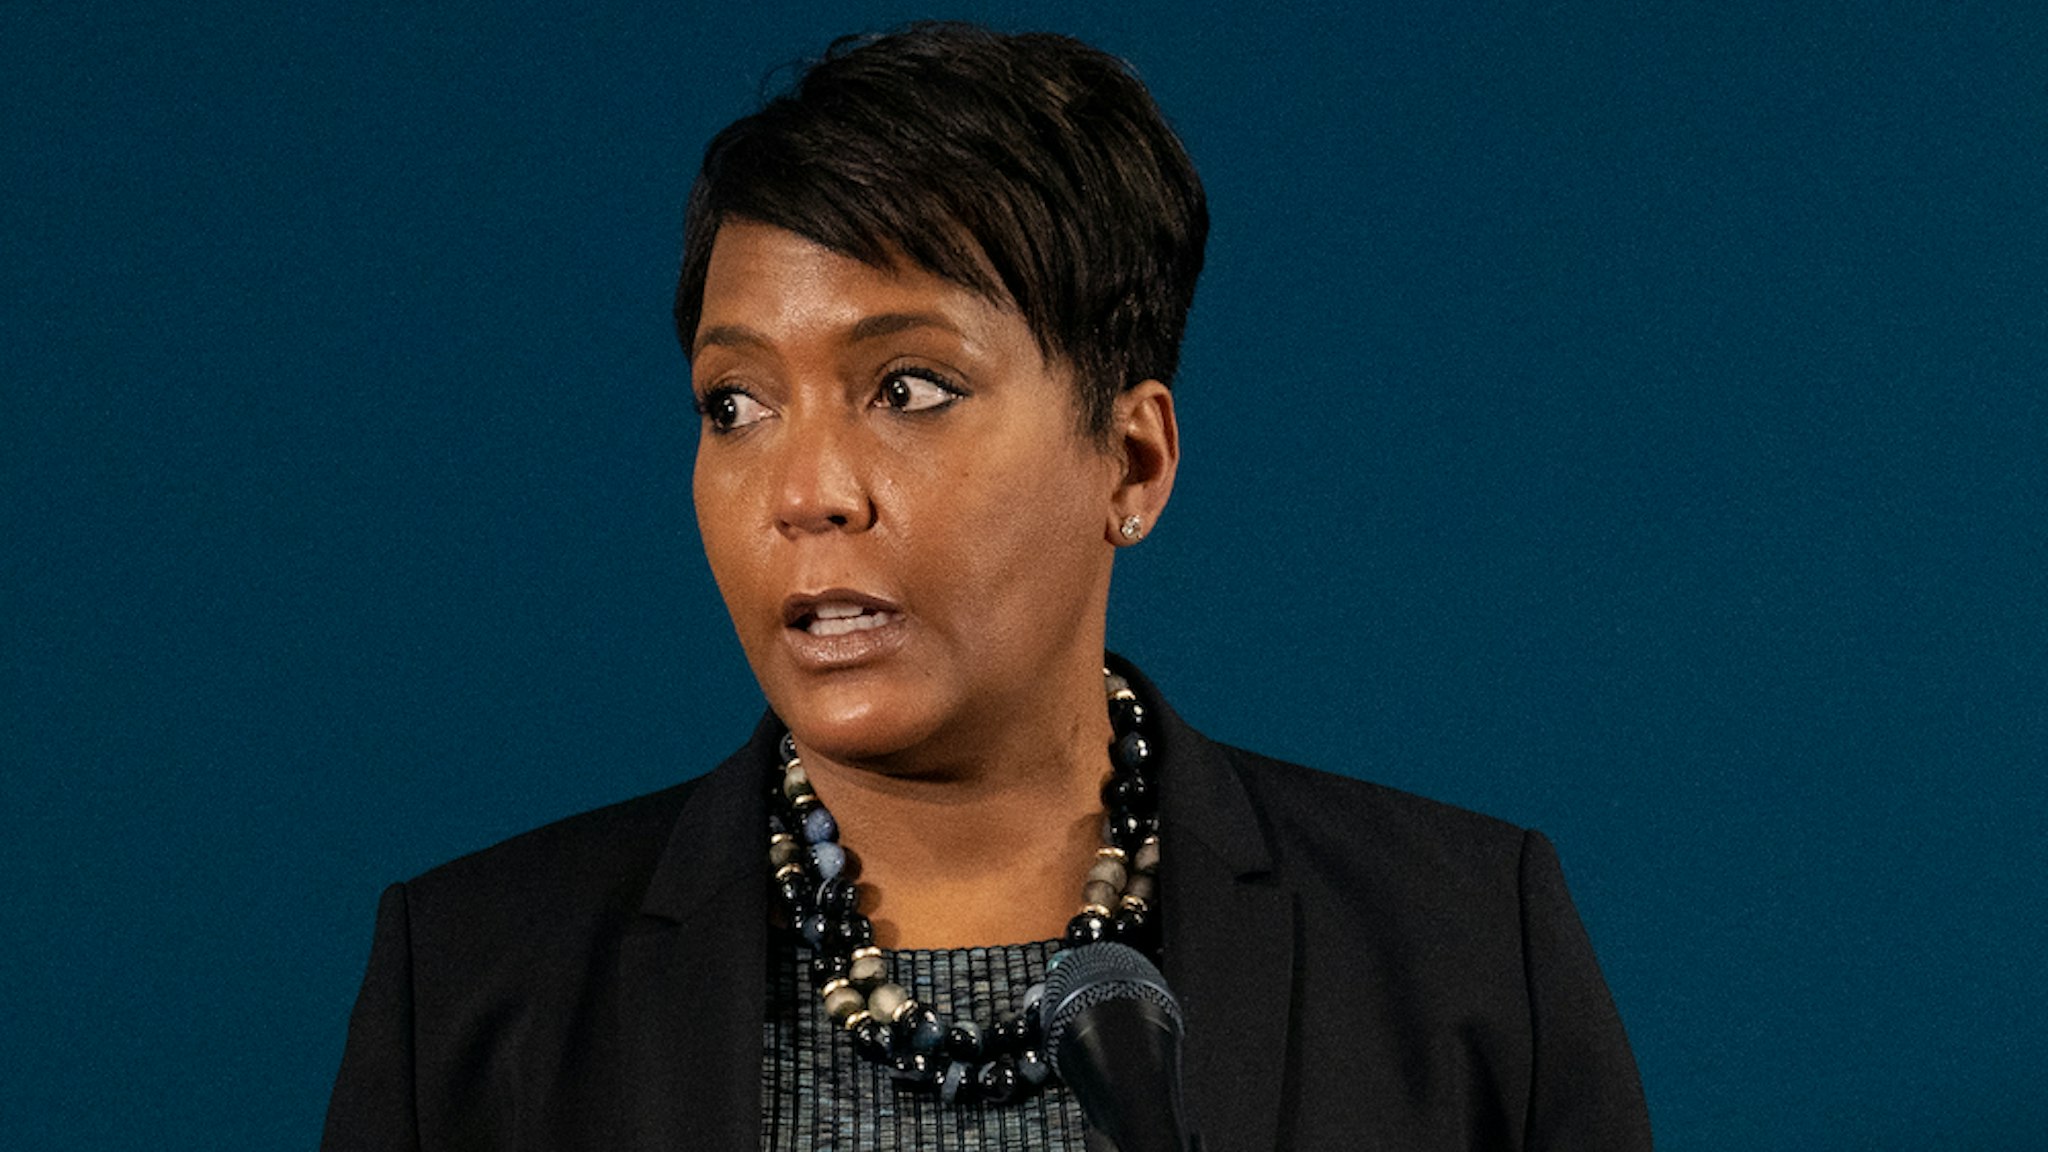 Atlanta, GA - MARCH 17: Mayor Keisha Lance Bottoms speaks at a press conference on March 17, 2021 in Atlanta, Georgia. Suspect Robert Aaron Long, 21, was arrested after a series of shootings at three Atlanta-area spas left eight people dead on Tuesday night, including six Asian women. (Photo by Megan Varner/Getty Images)